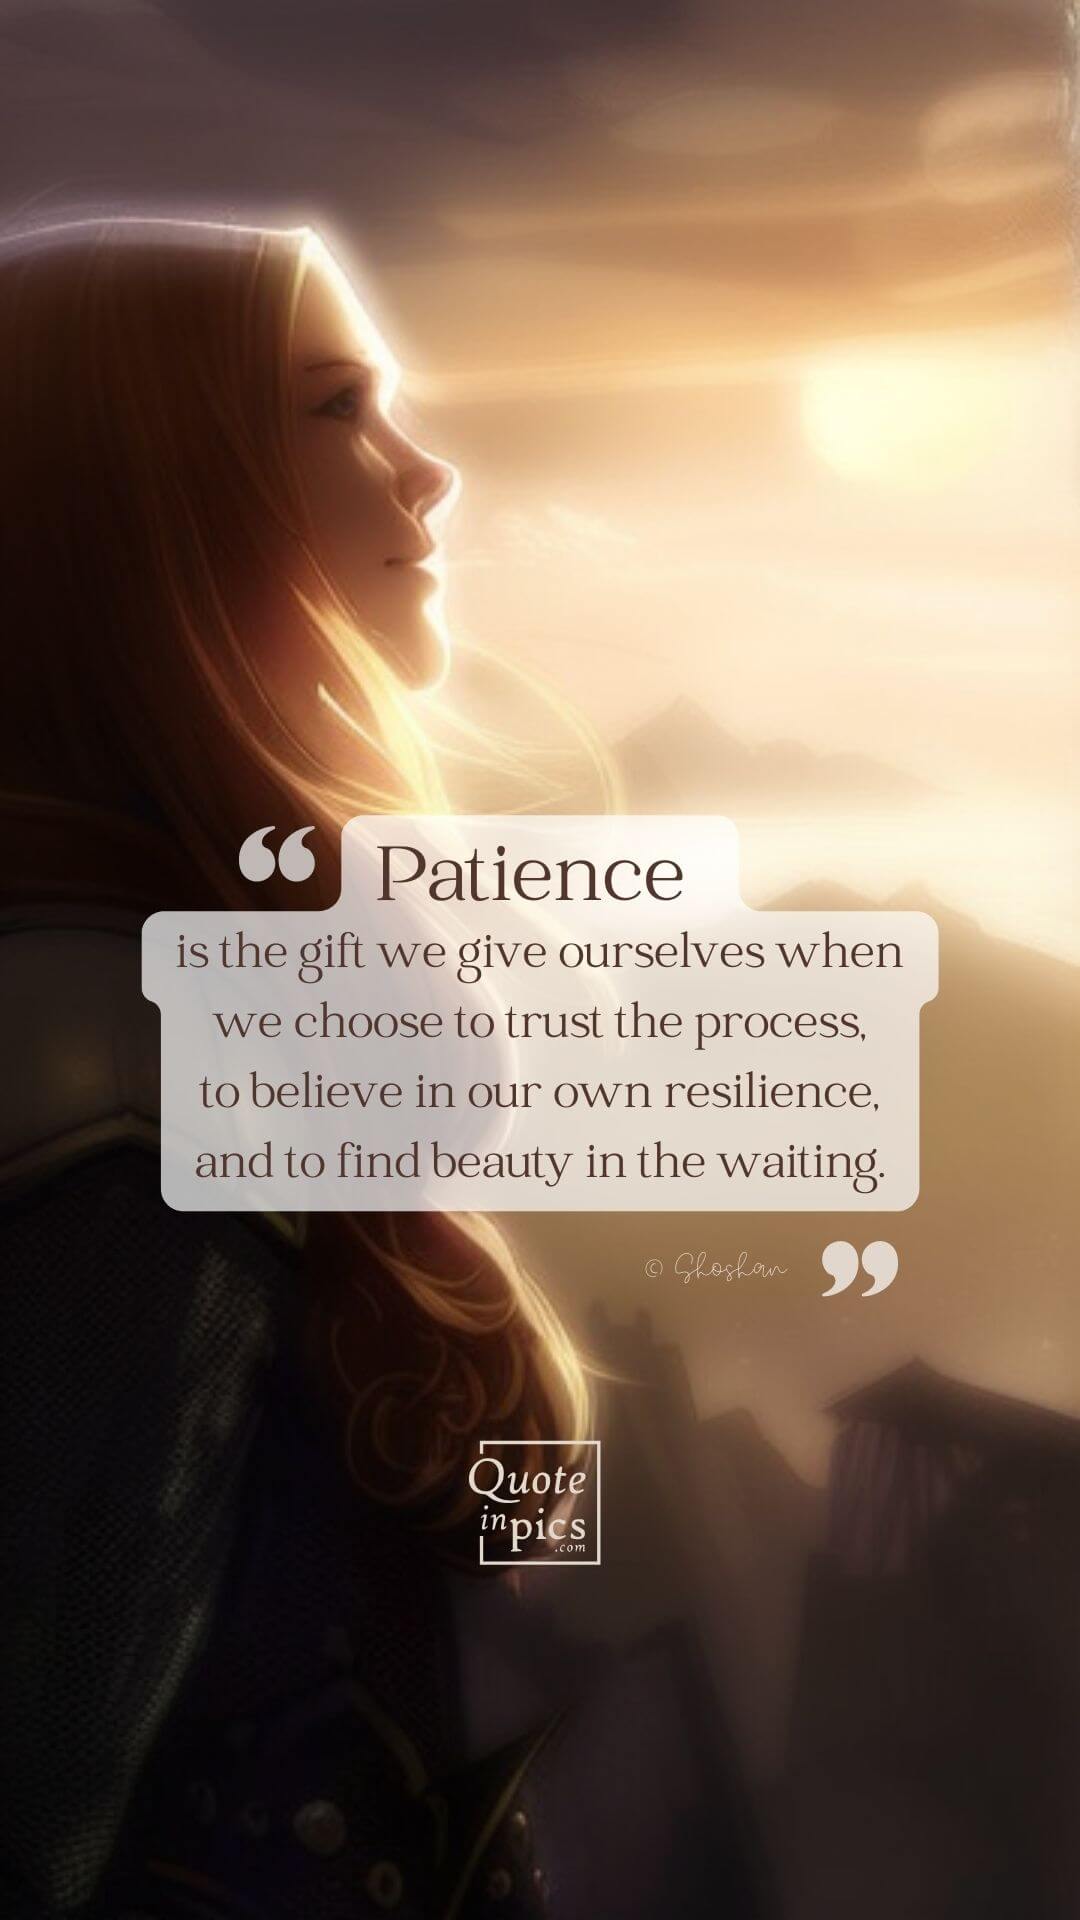 Patience is the gift we give ourselves when we choose to trust the process